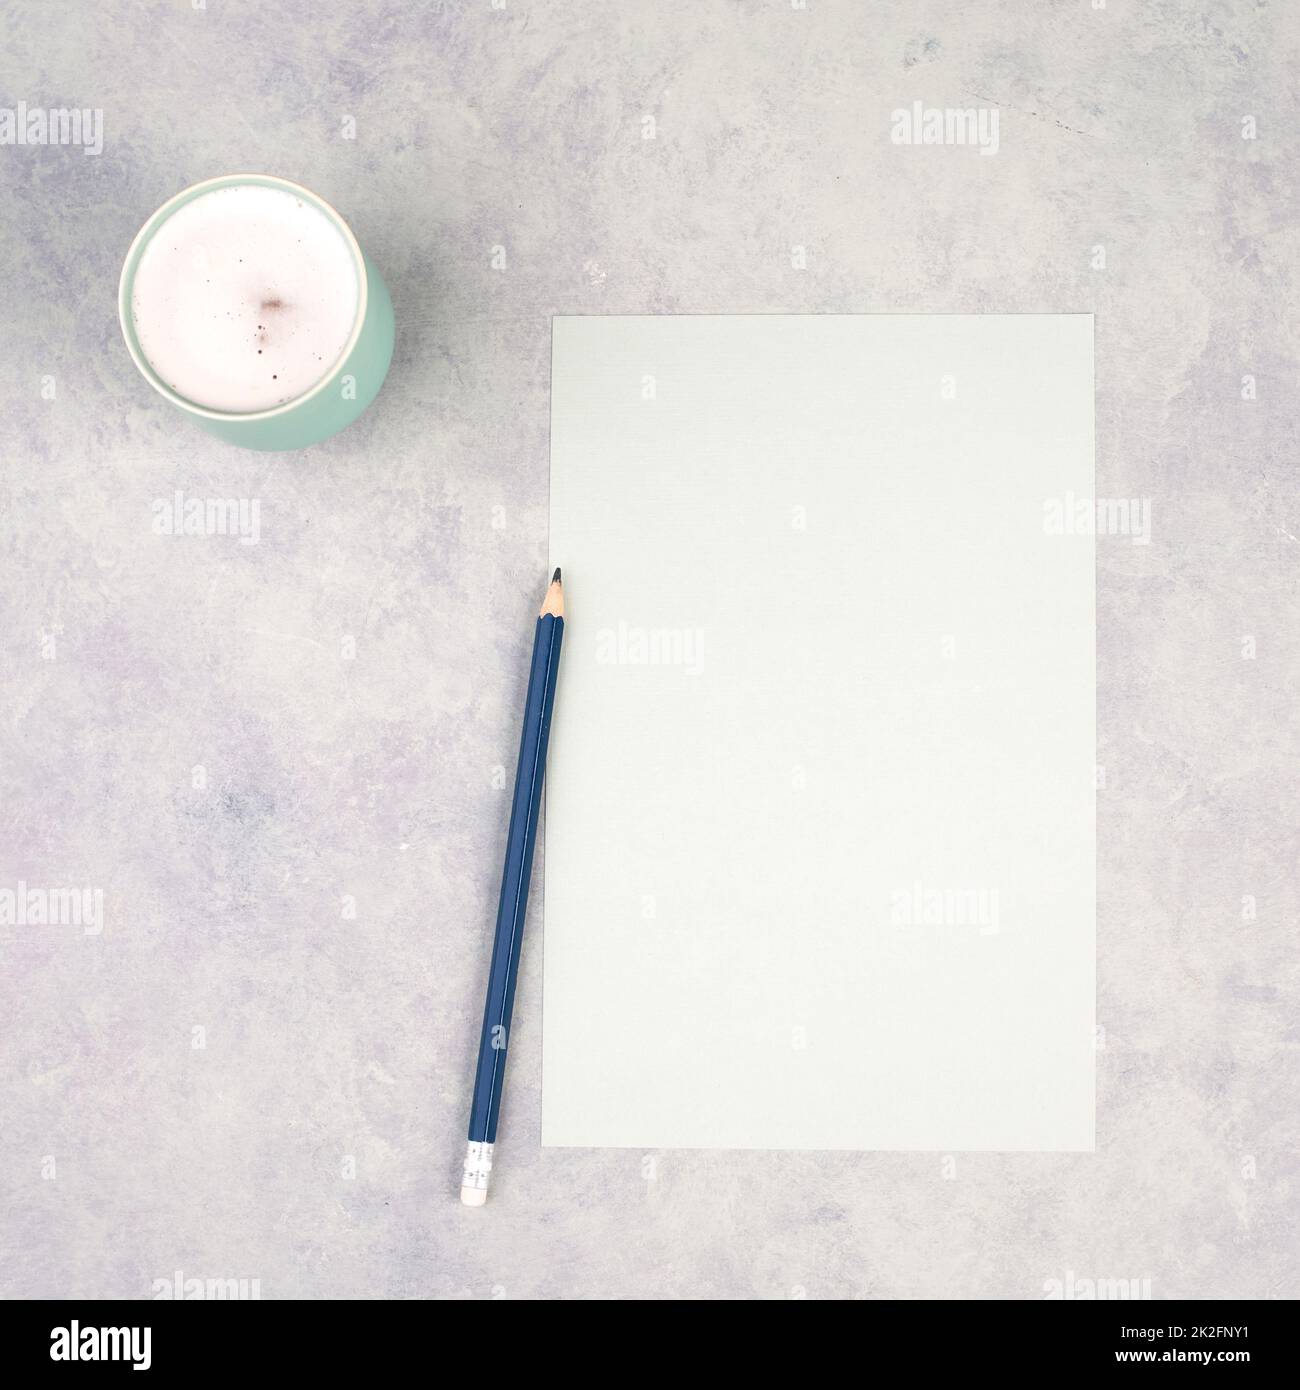 Empty paper with a pen and a cup of coffee, textured background, brainstorming for new ideas, writing a message, taking a break, home office desk Stock Photo